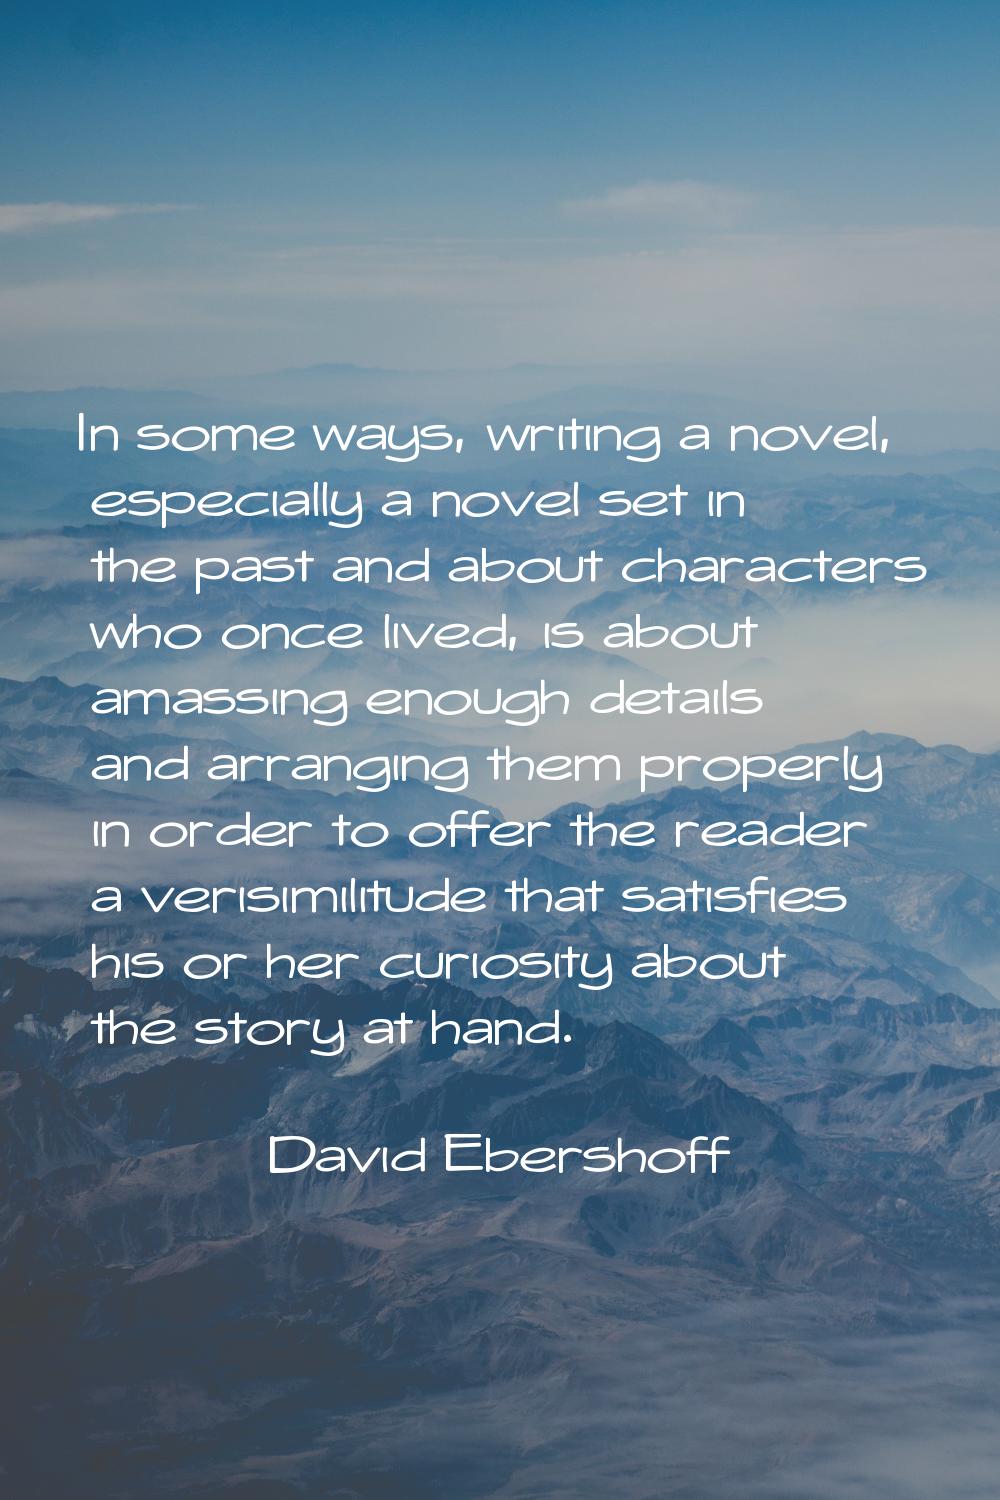 In some ways, writing a novel, especially a novel set in the past and about characters who once liv